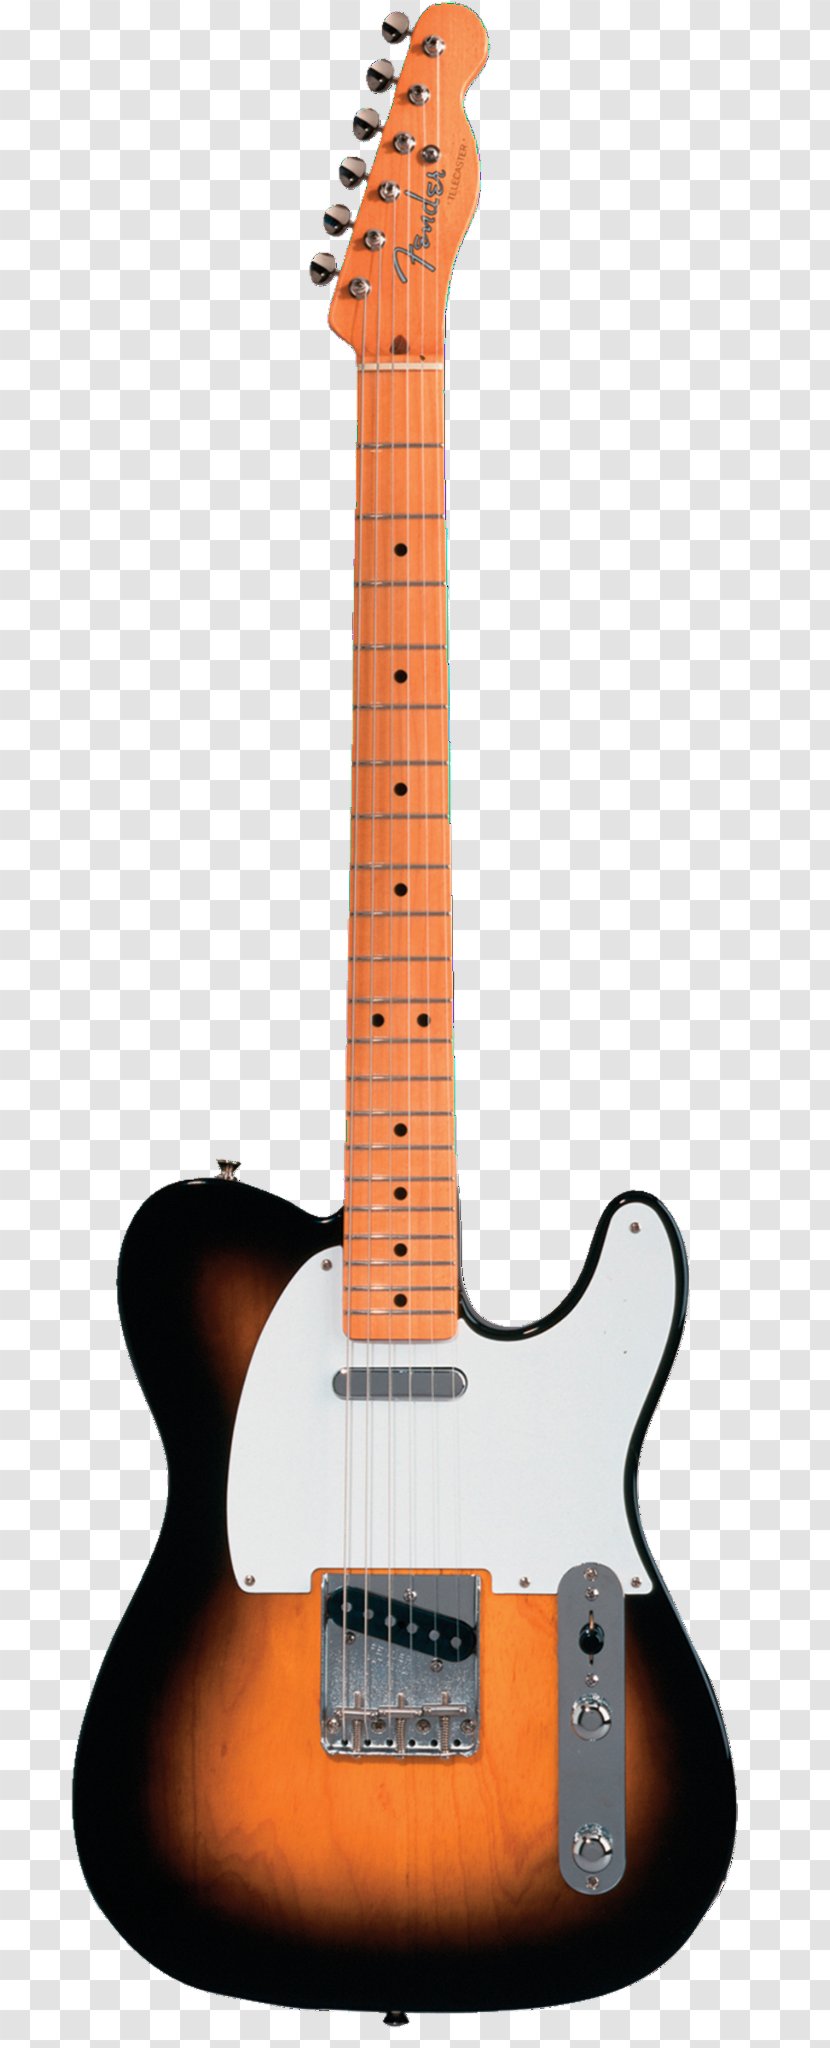 Fender Musical Instruments Corporation Telecaster Classic Series 50s Electric Guitar Sunburst - Plucked String Transparent PNG